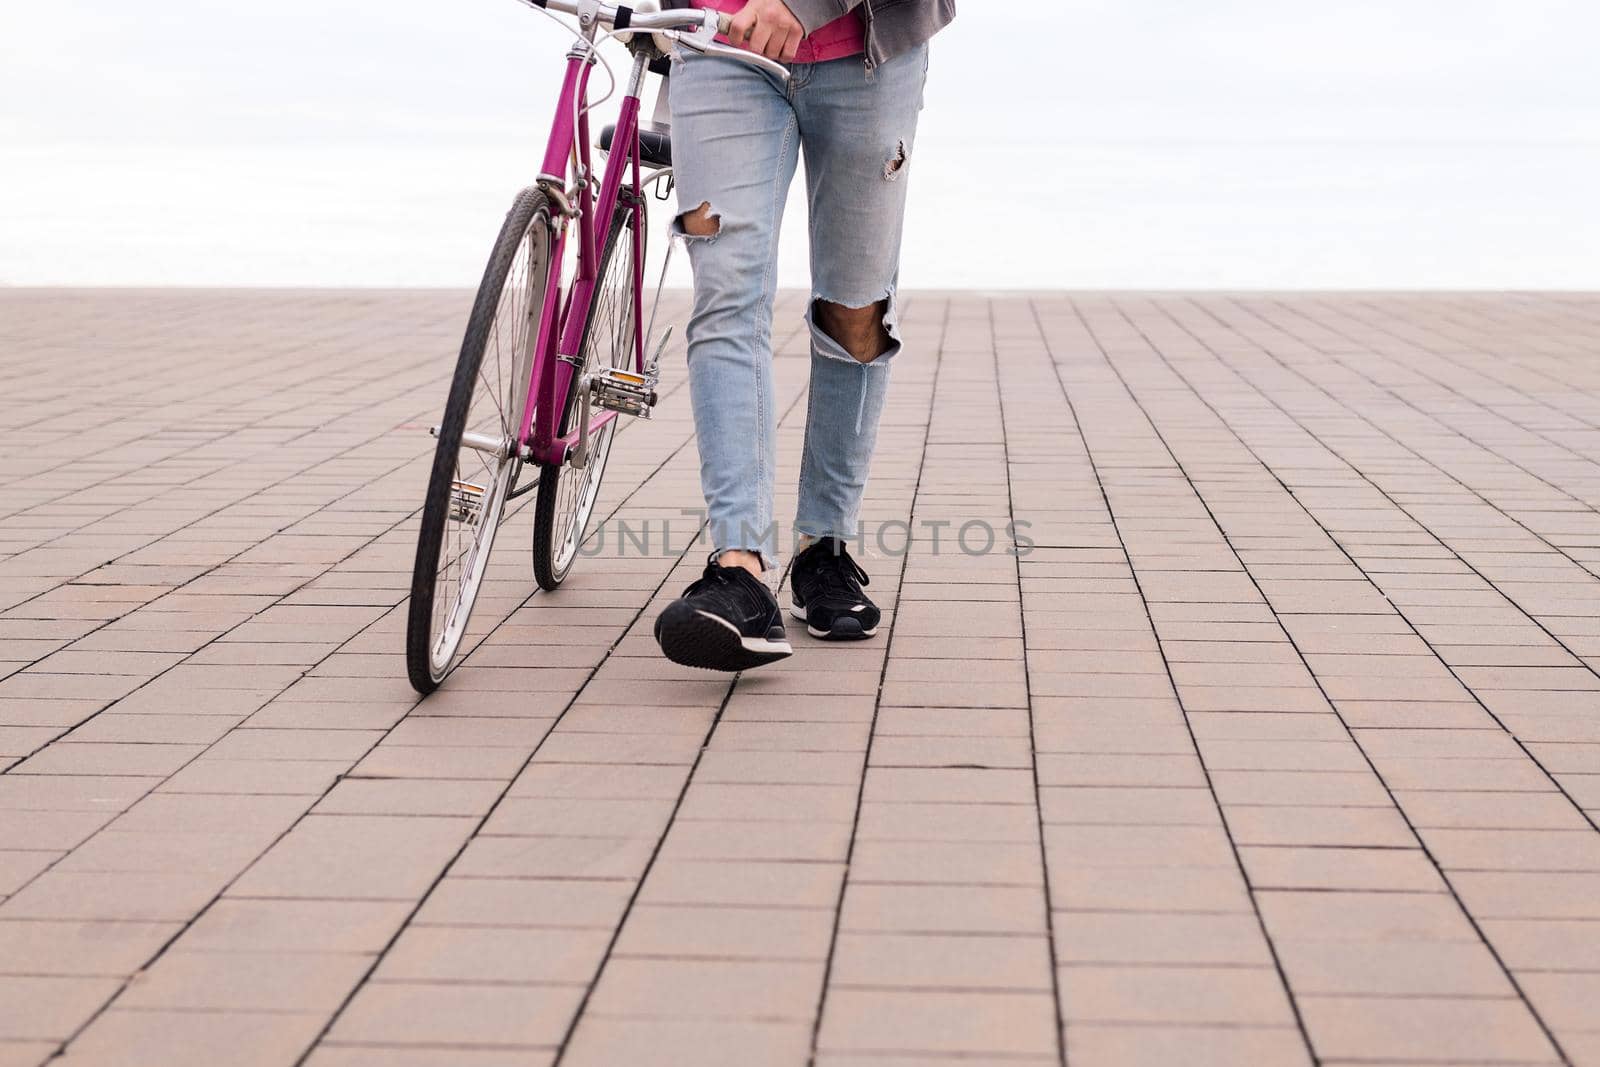 unrecognizable young man walking pushing a bicycle by raulmelldo